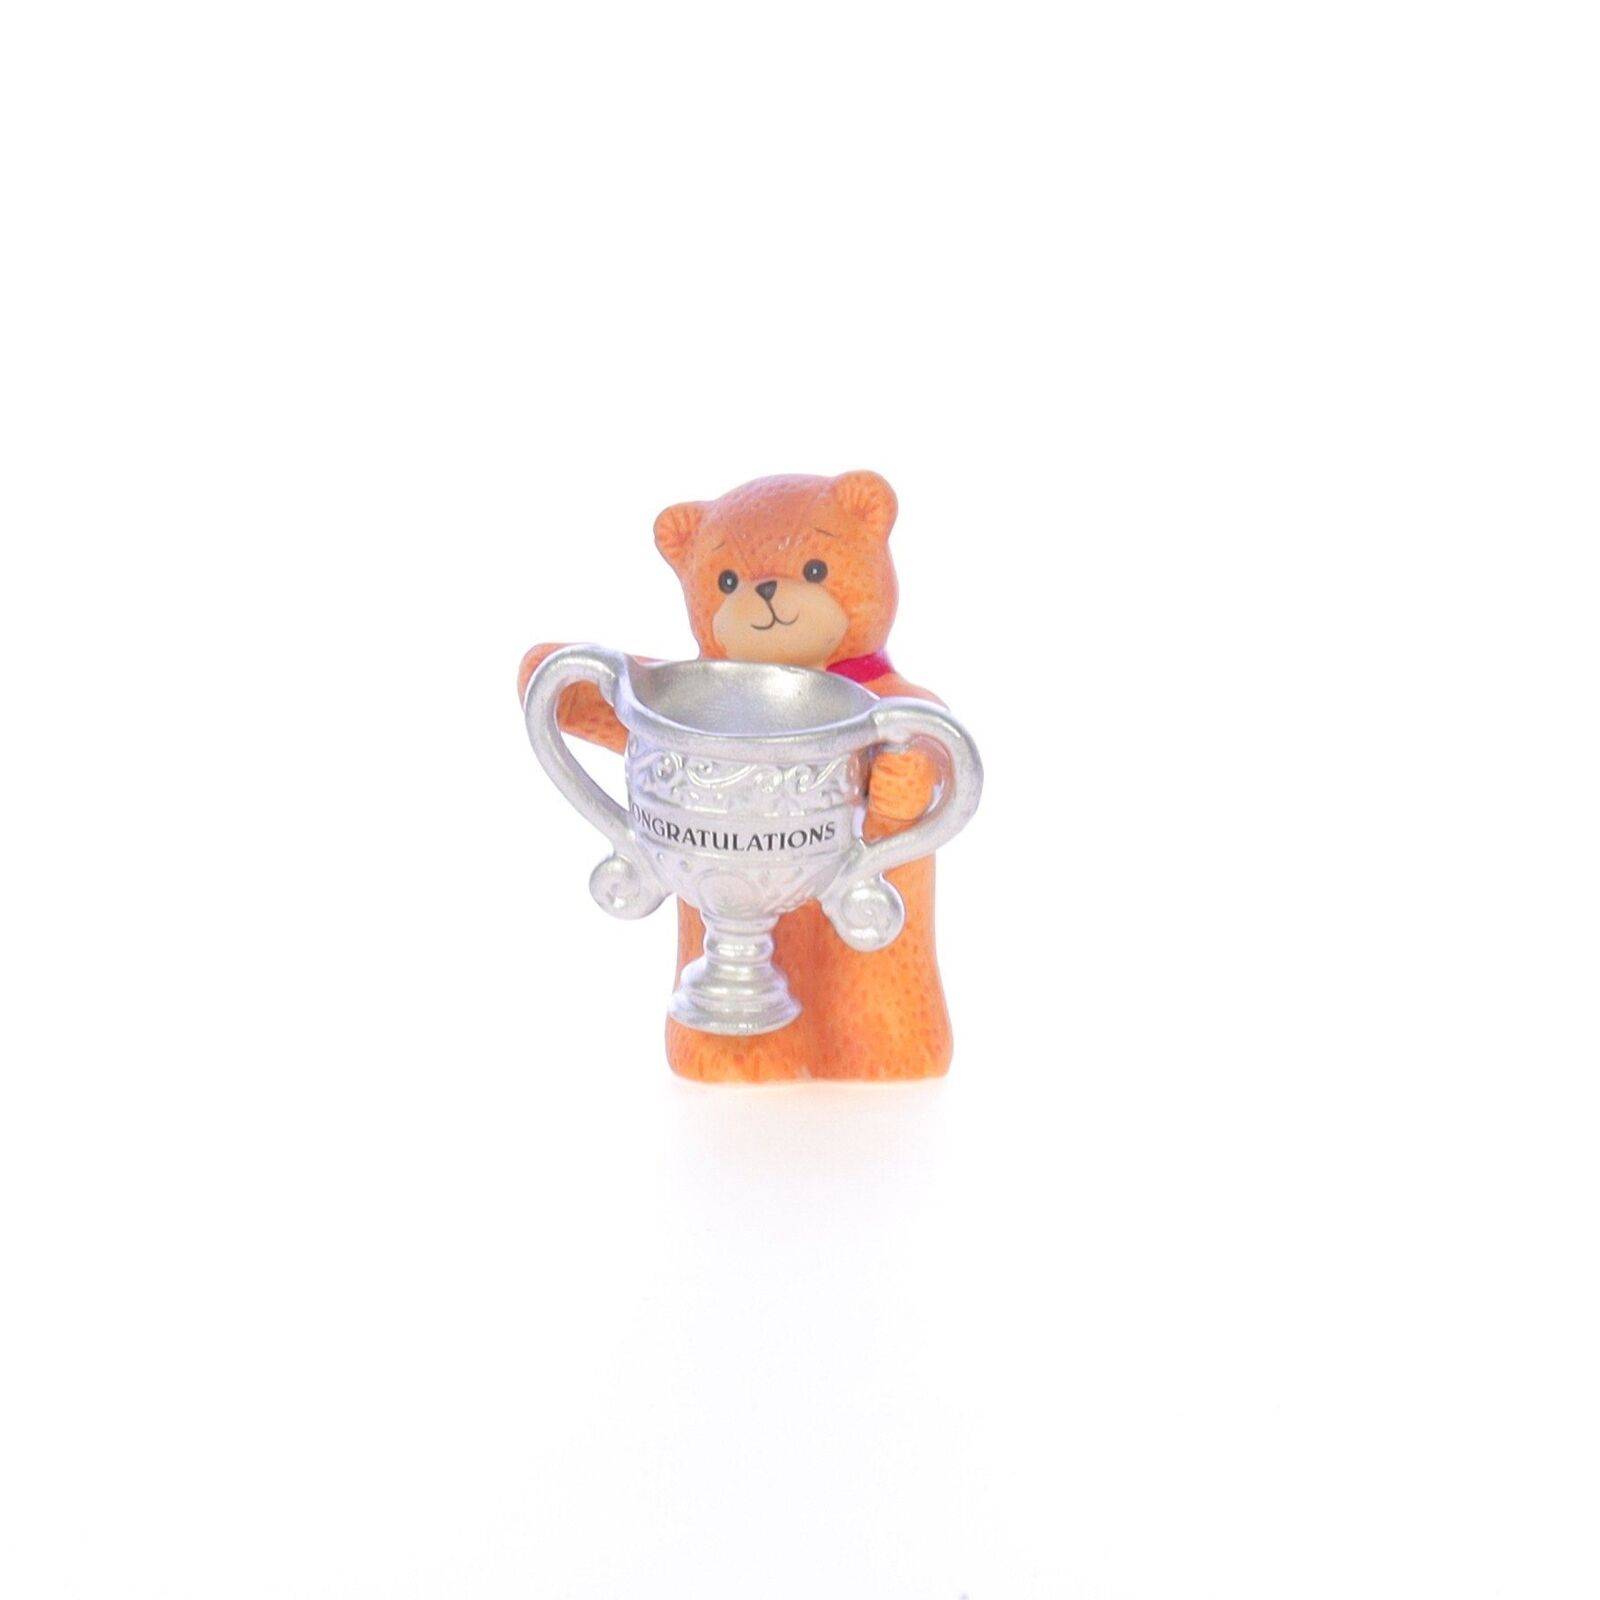 Lucy and Me Vintage 1985 Porcelain Figurine Bear with Congraulations Trophy Cup